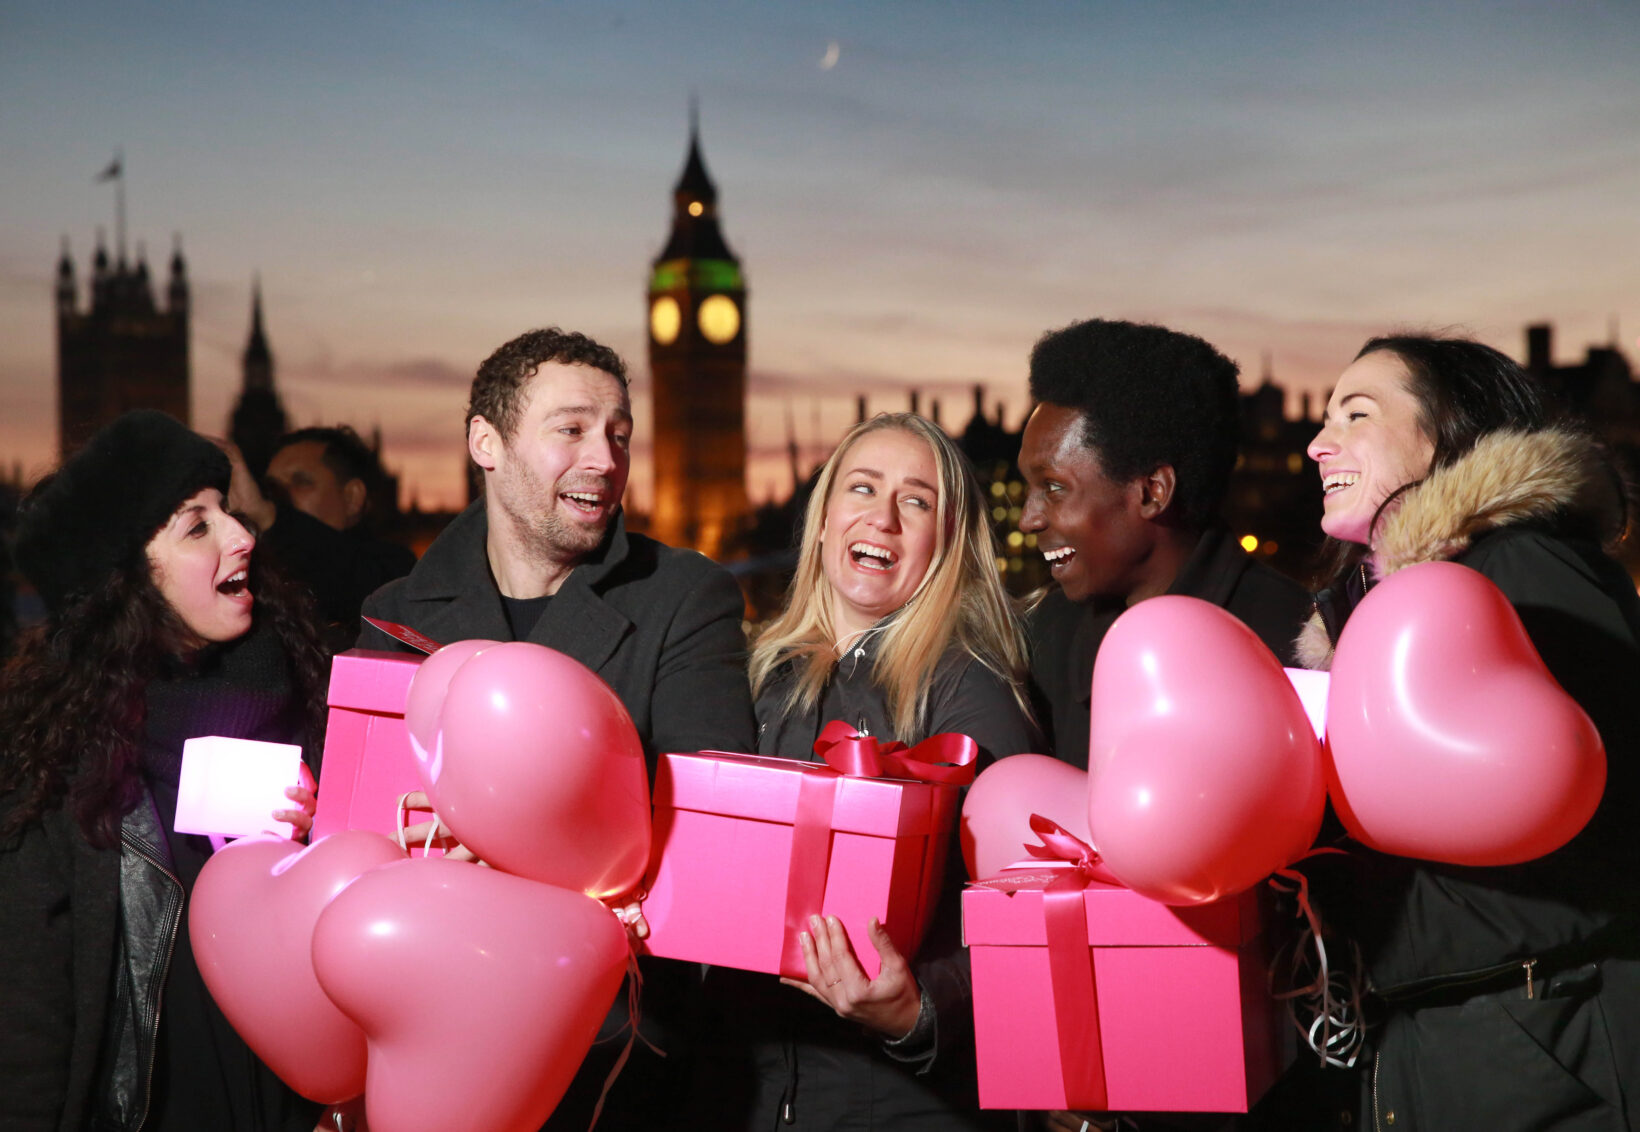 people holding pink gifts, london skyline